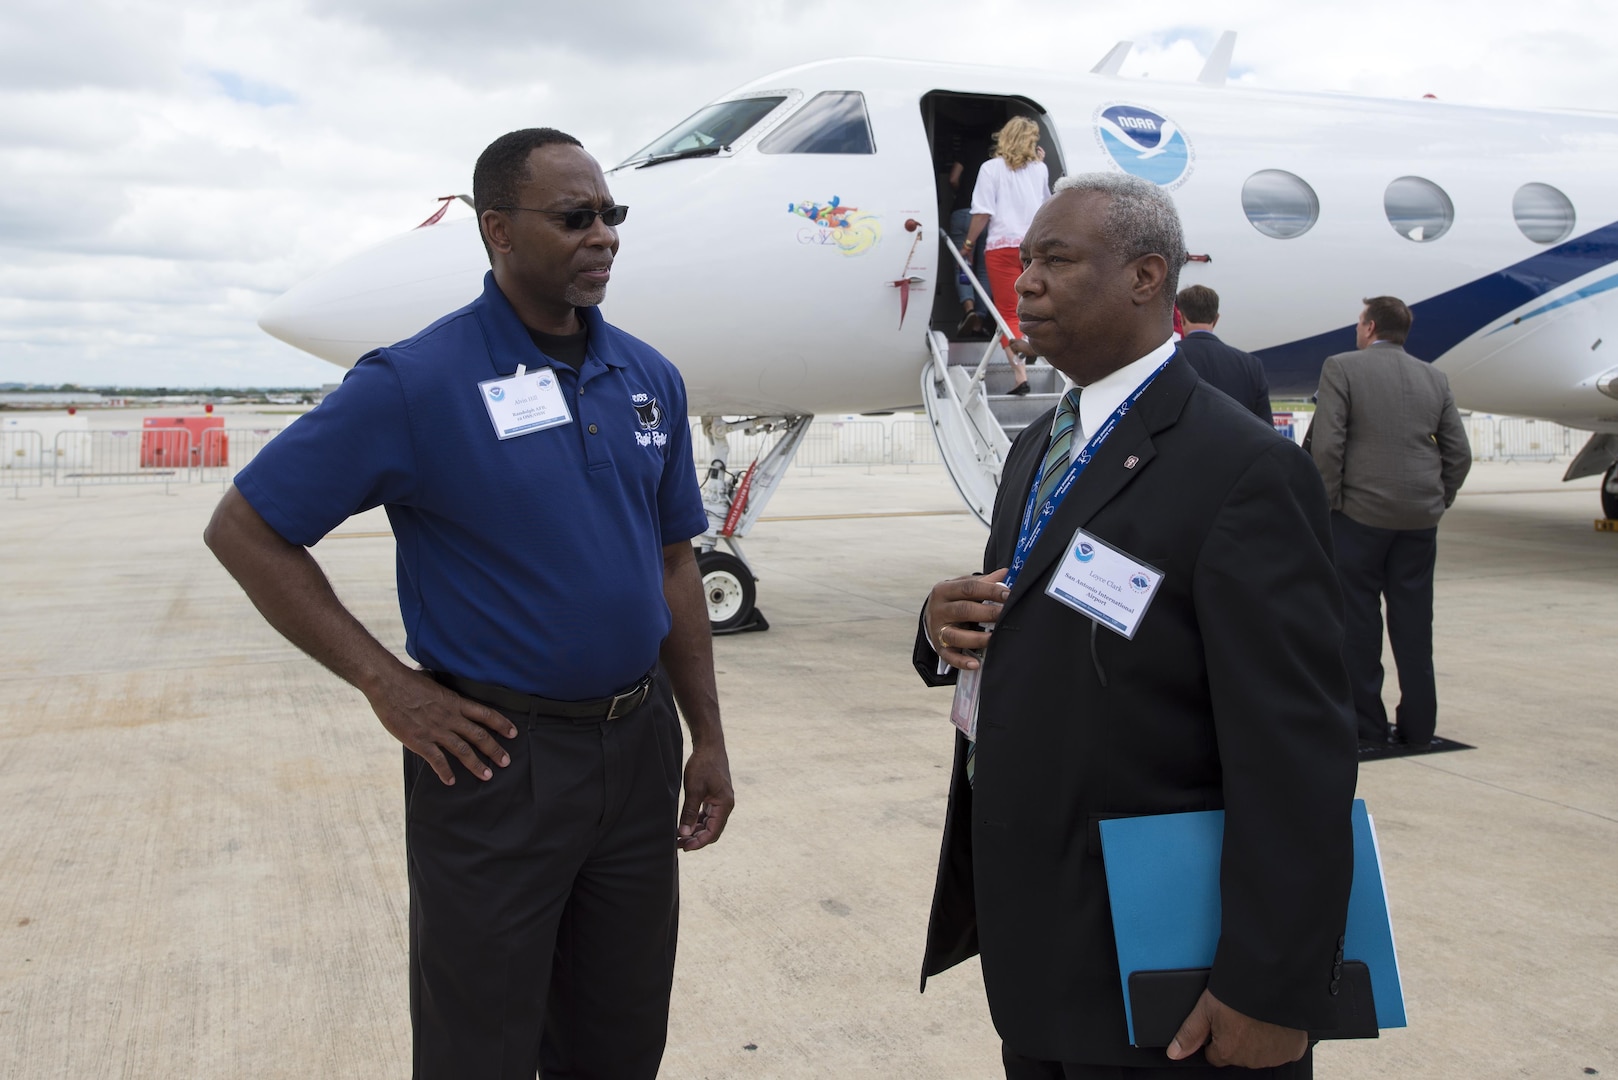 Alvin Hill, 12th Operations Support Squadron Weather Operations Flight chief, speaks with Loyce Clark, San Antonio Airport System assistant aviation director, after touring a National Oceanic Atmospheric Administration Gulfstream IV aircraft during the Hurricane Awareness Tour at the San Antonio International Airport May 16, 2016. The NOAA G-IV is used to collect, process and transmit vertical atmospheric soundings in the environment of a hurricane using a dropsonde, which is an instrument dropped from the aircraft carried by a parachute that transmits information about temperature, pressure and humidity. 